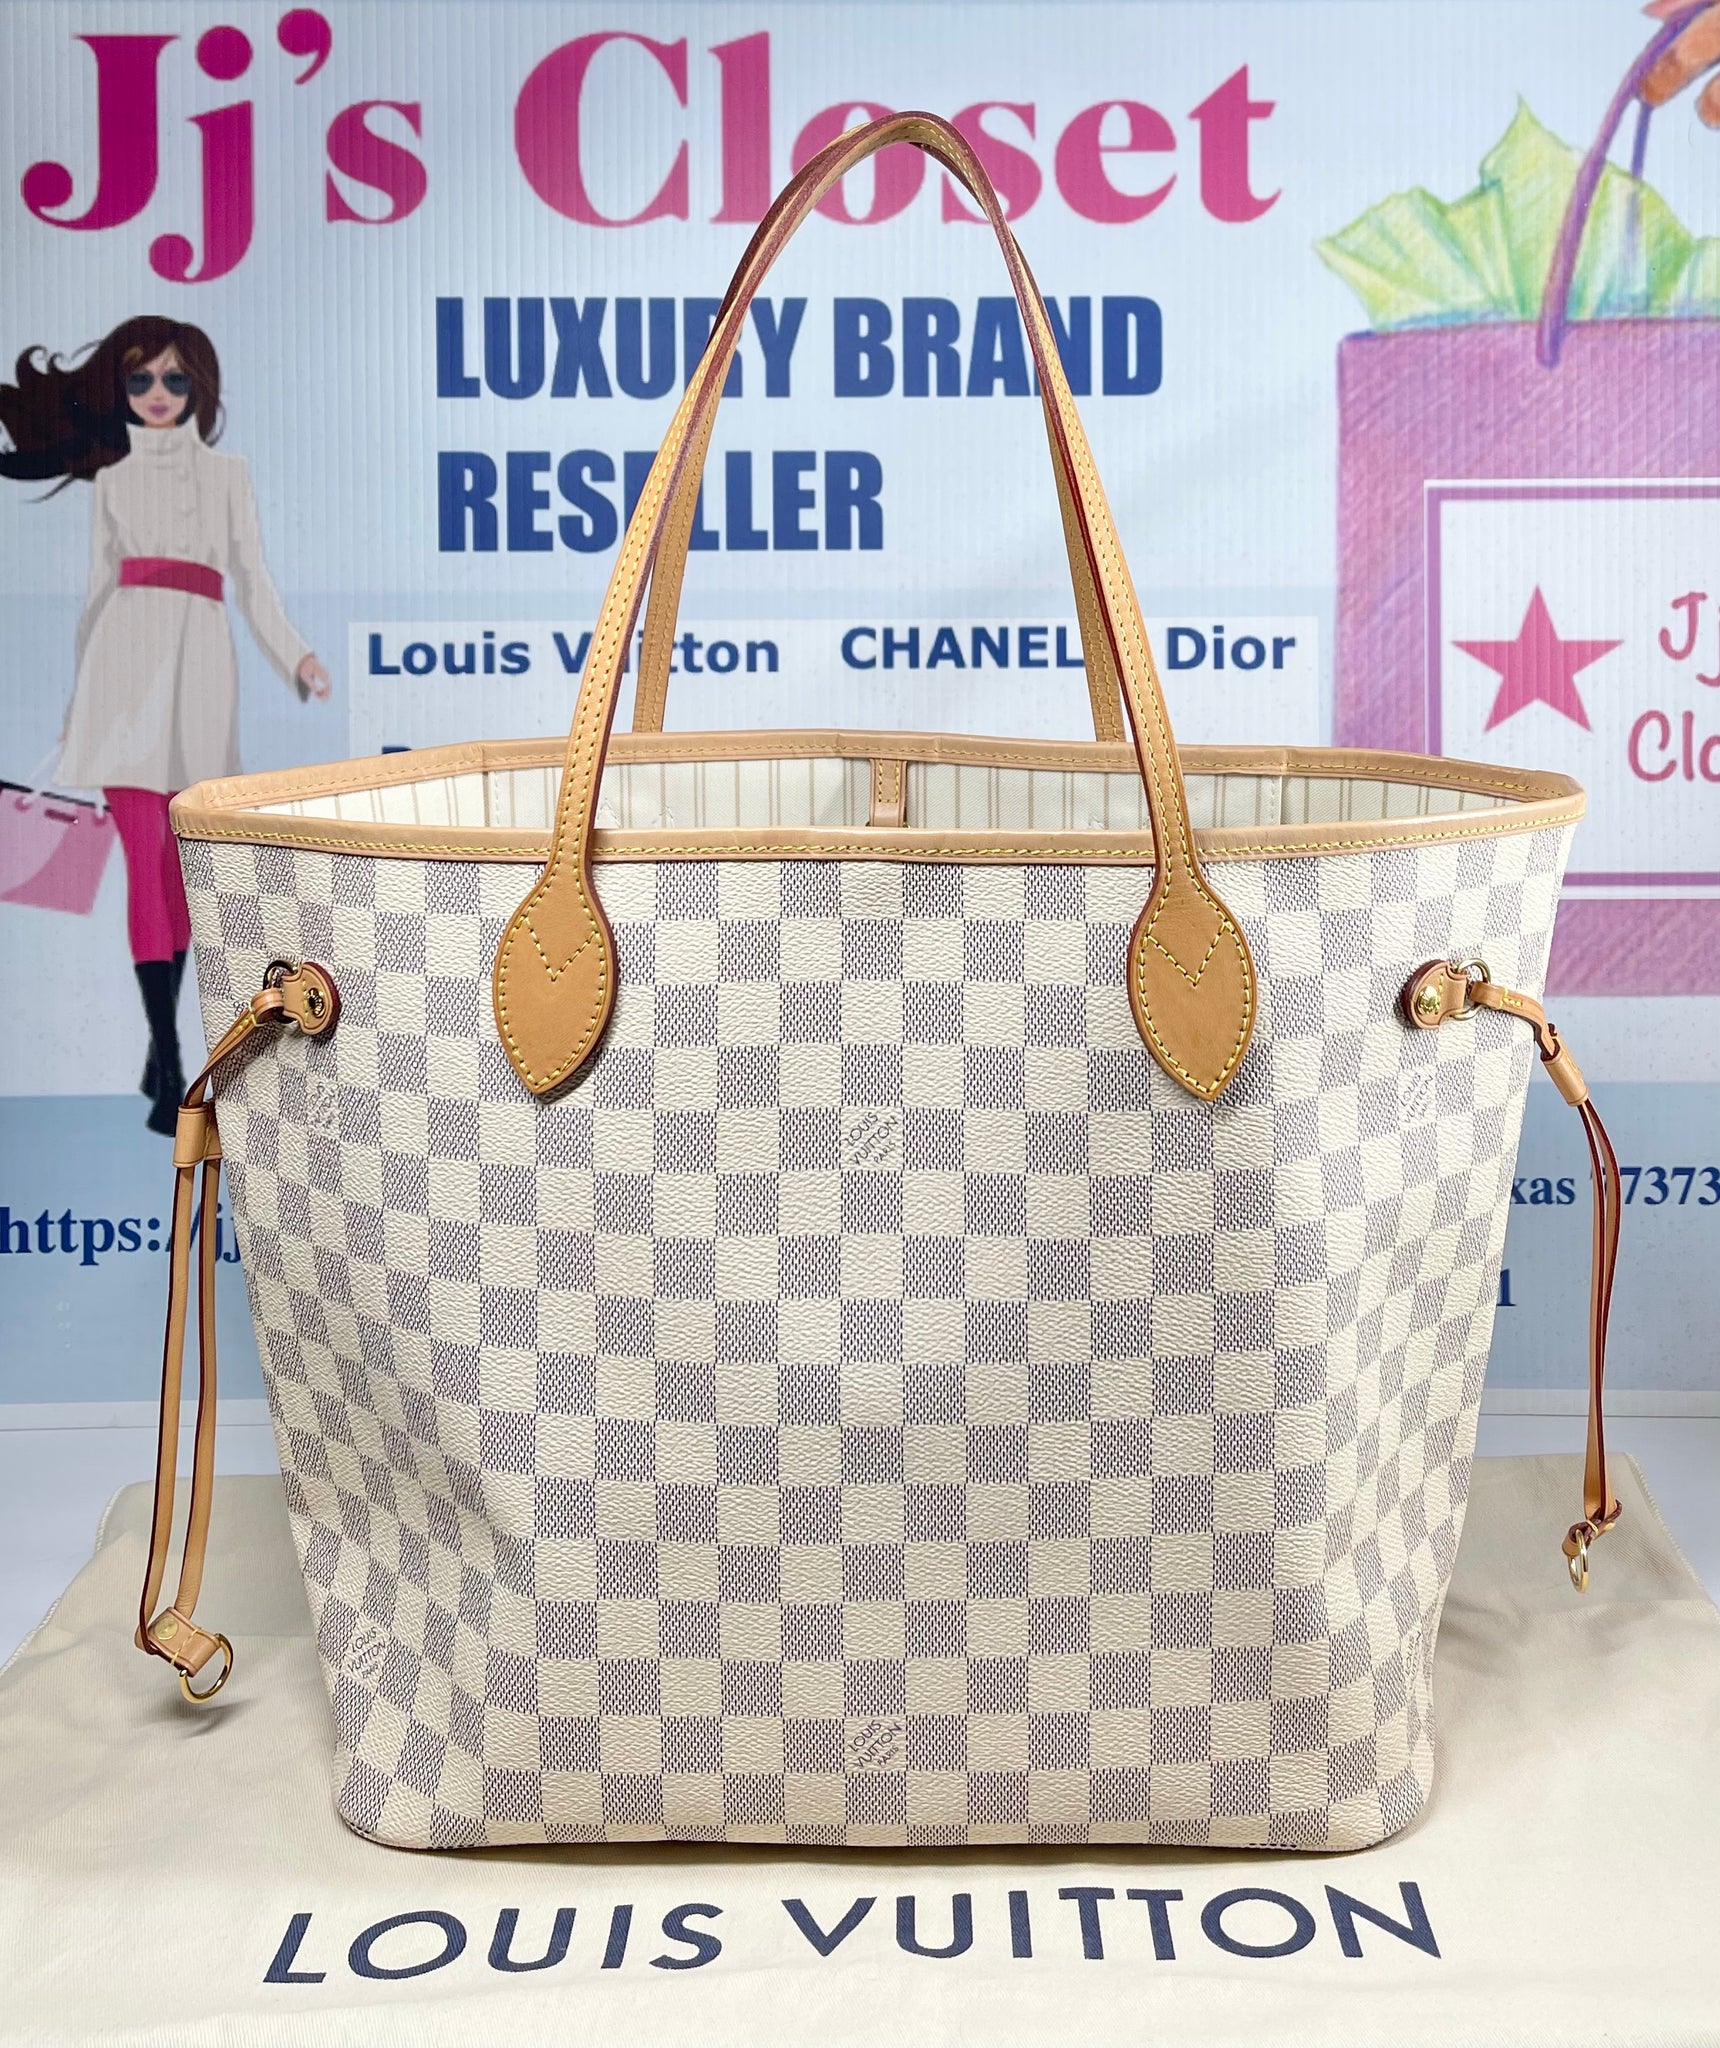 Pre-Owned Louis Vuitton Neverfull Damier Azur MM Tote Bag - Very